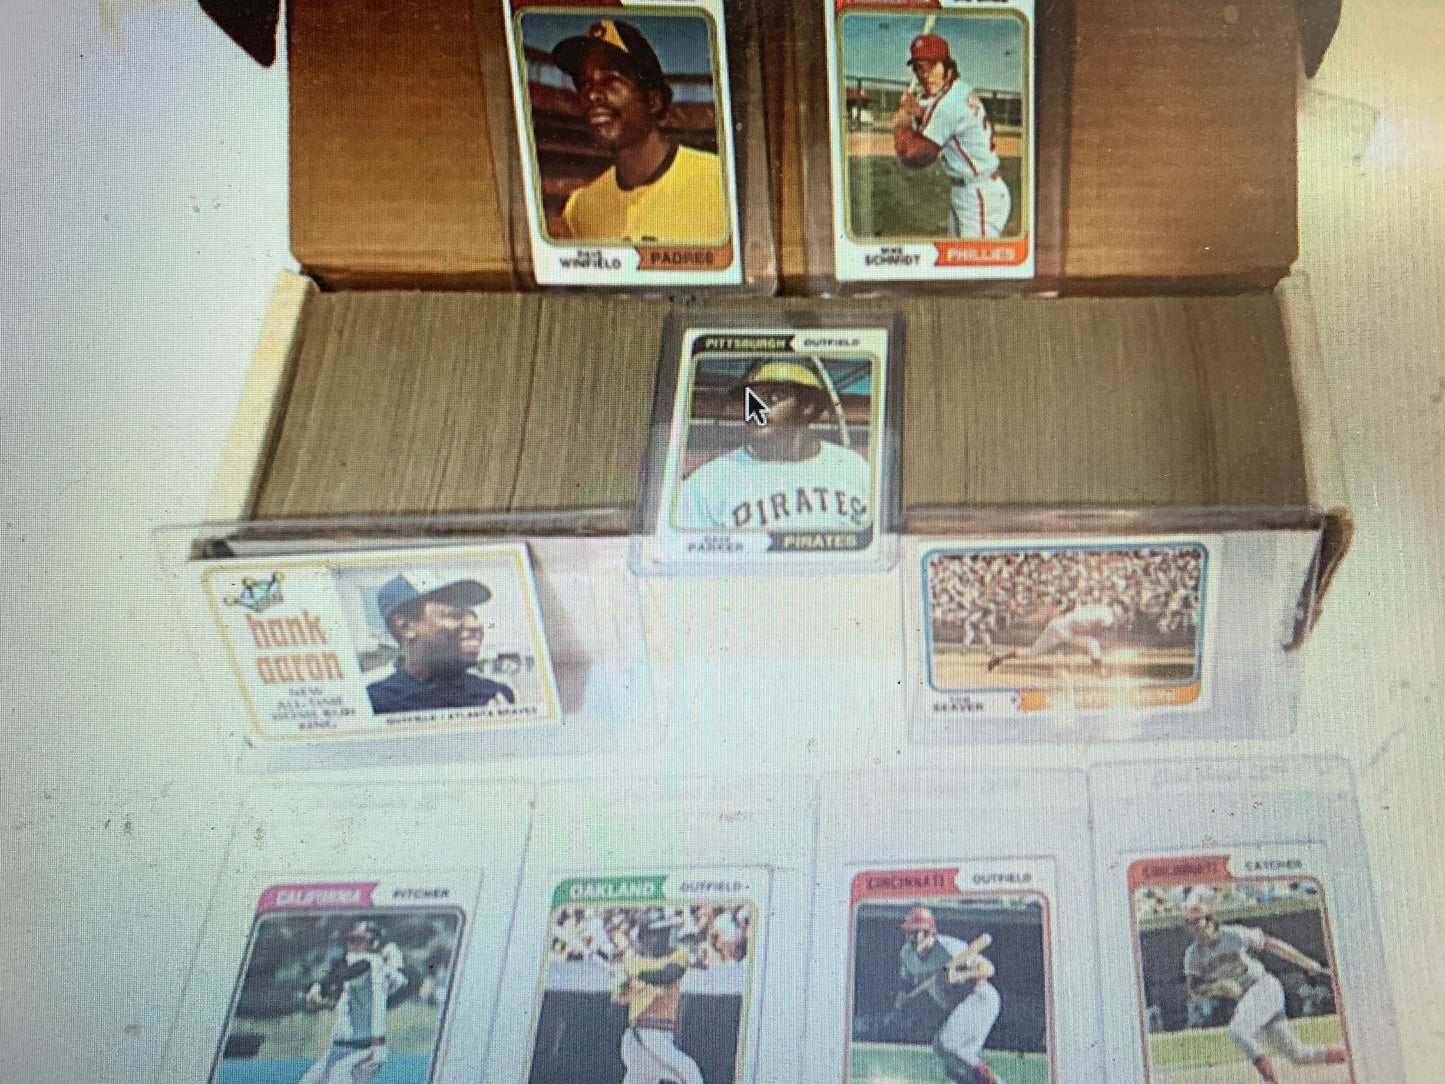 1974 Topps Baseball Complete Set 660 Cards Winfield Parker RC Vg-Ex No Creases